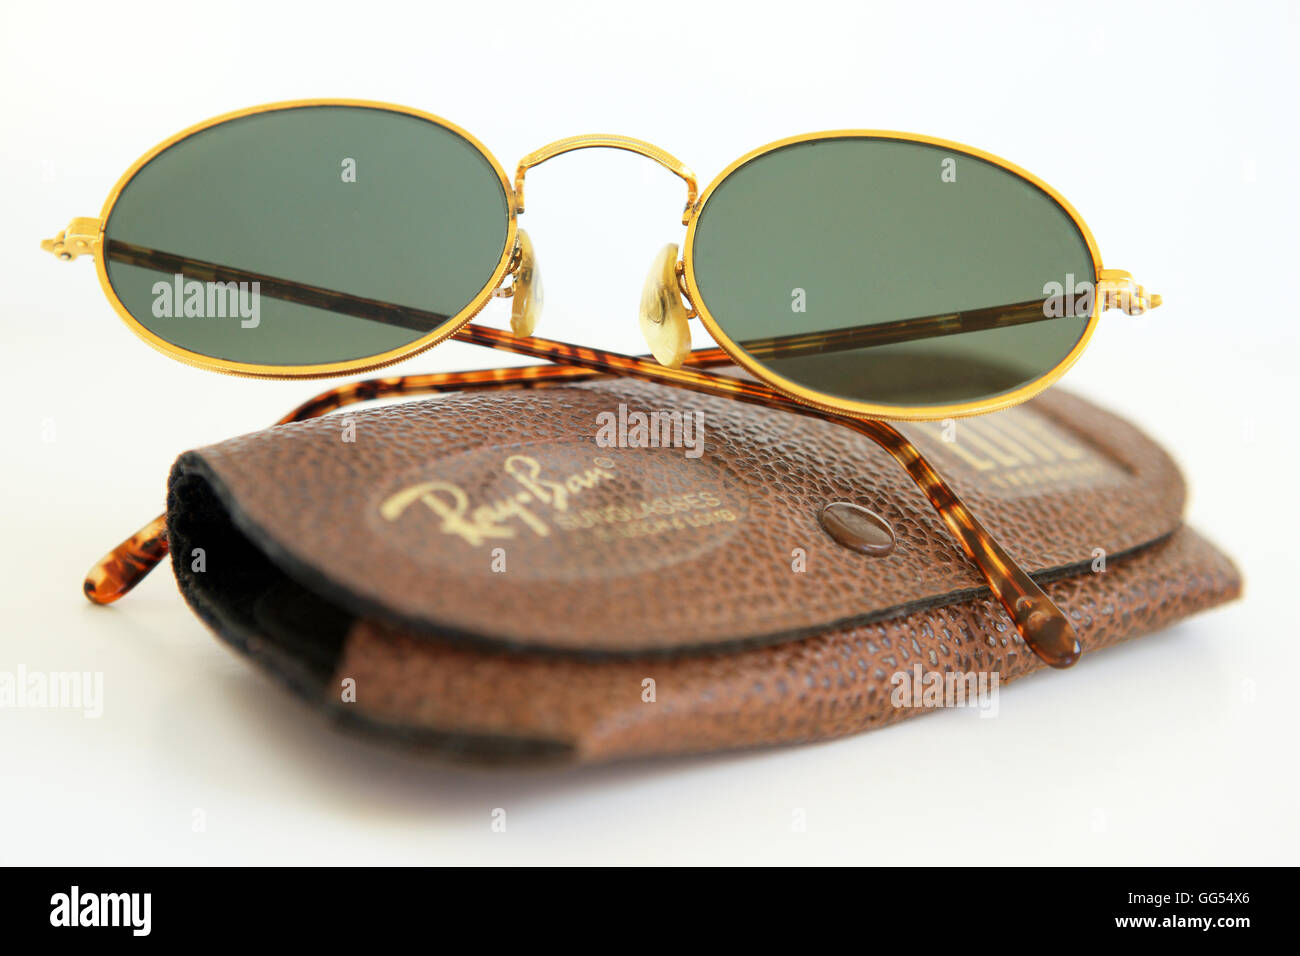 Share more than 128 ray ban w0976 sunglasses latest